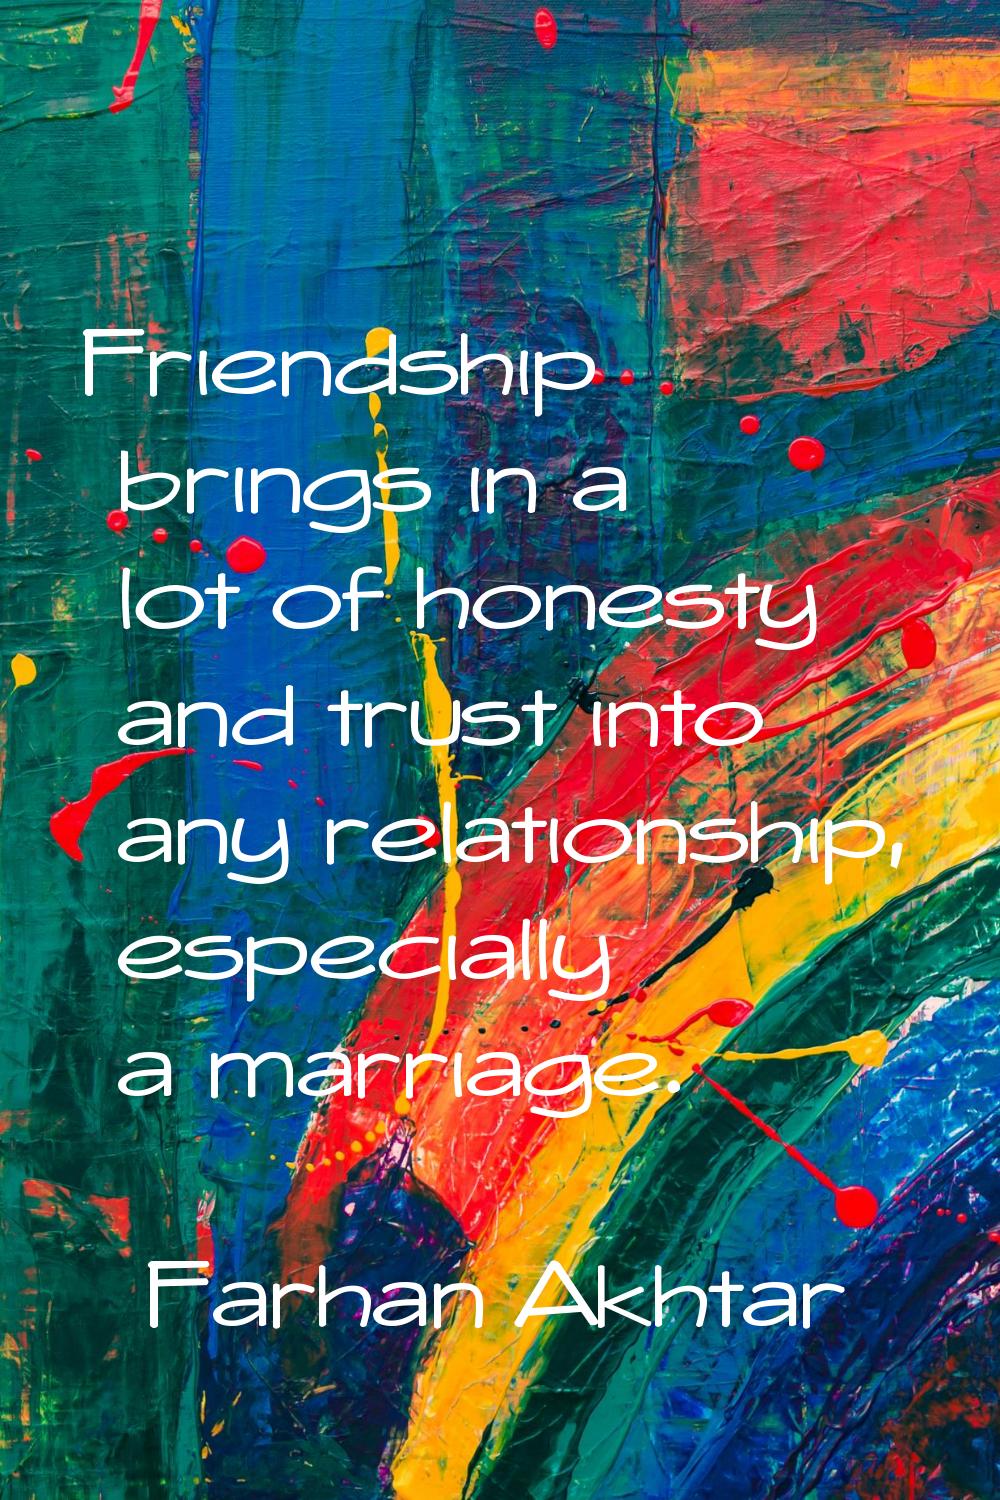 Friendship brings in a lot of honesty and trust into any relationship, especially a marriage.